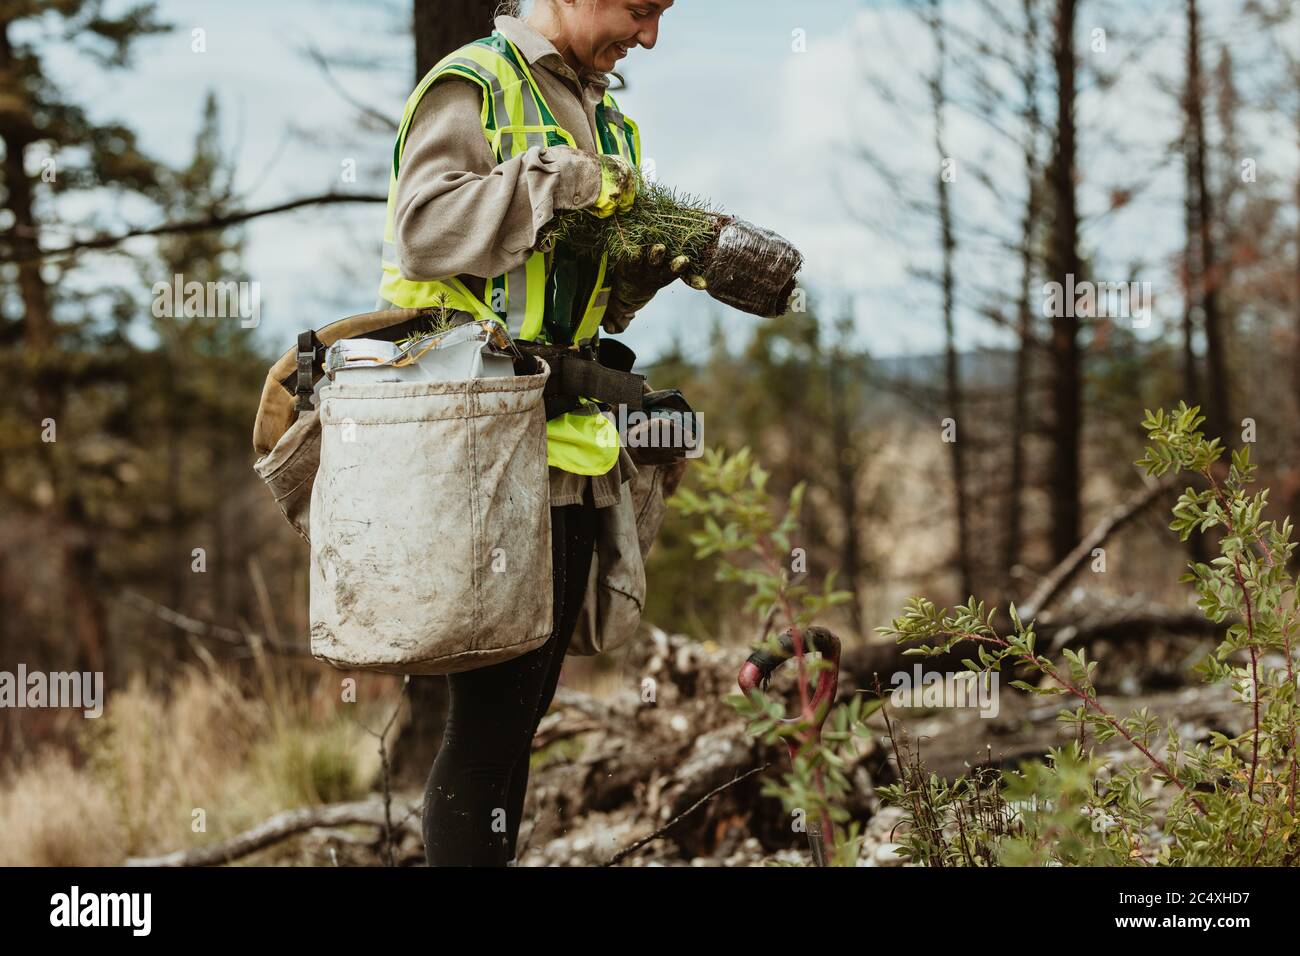 Female tree planter wearing reflective vest standing in forest holding small trees. Woman working in forest planting new trees. Stock Photo